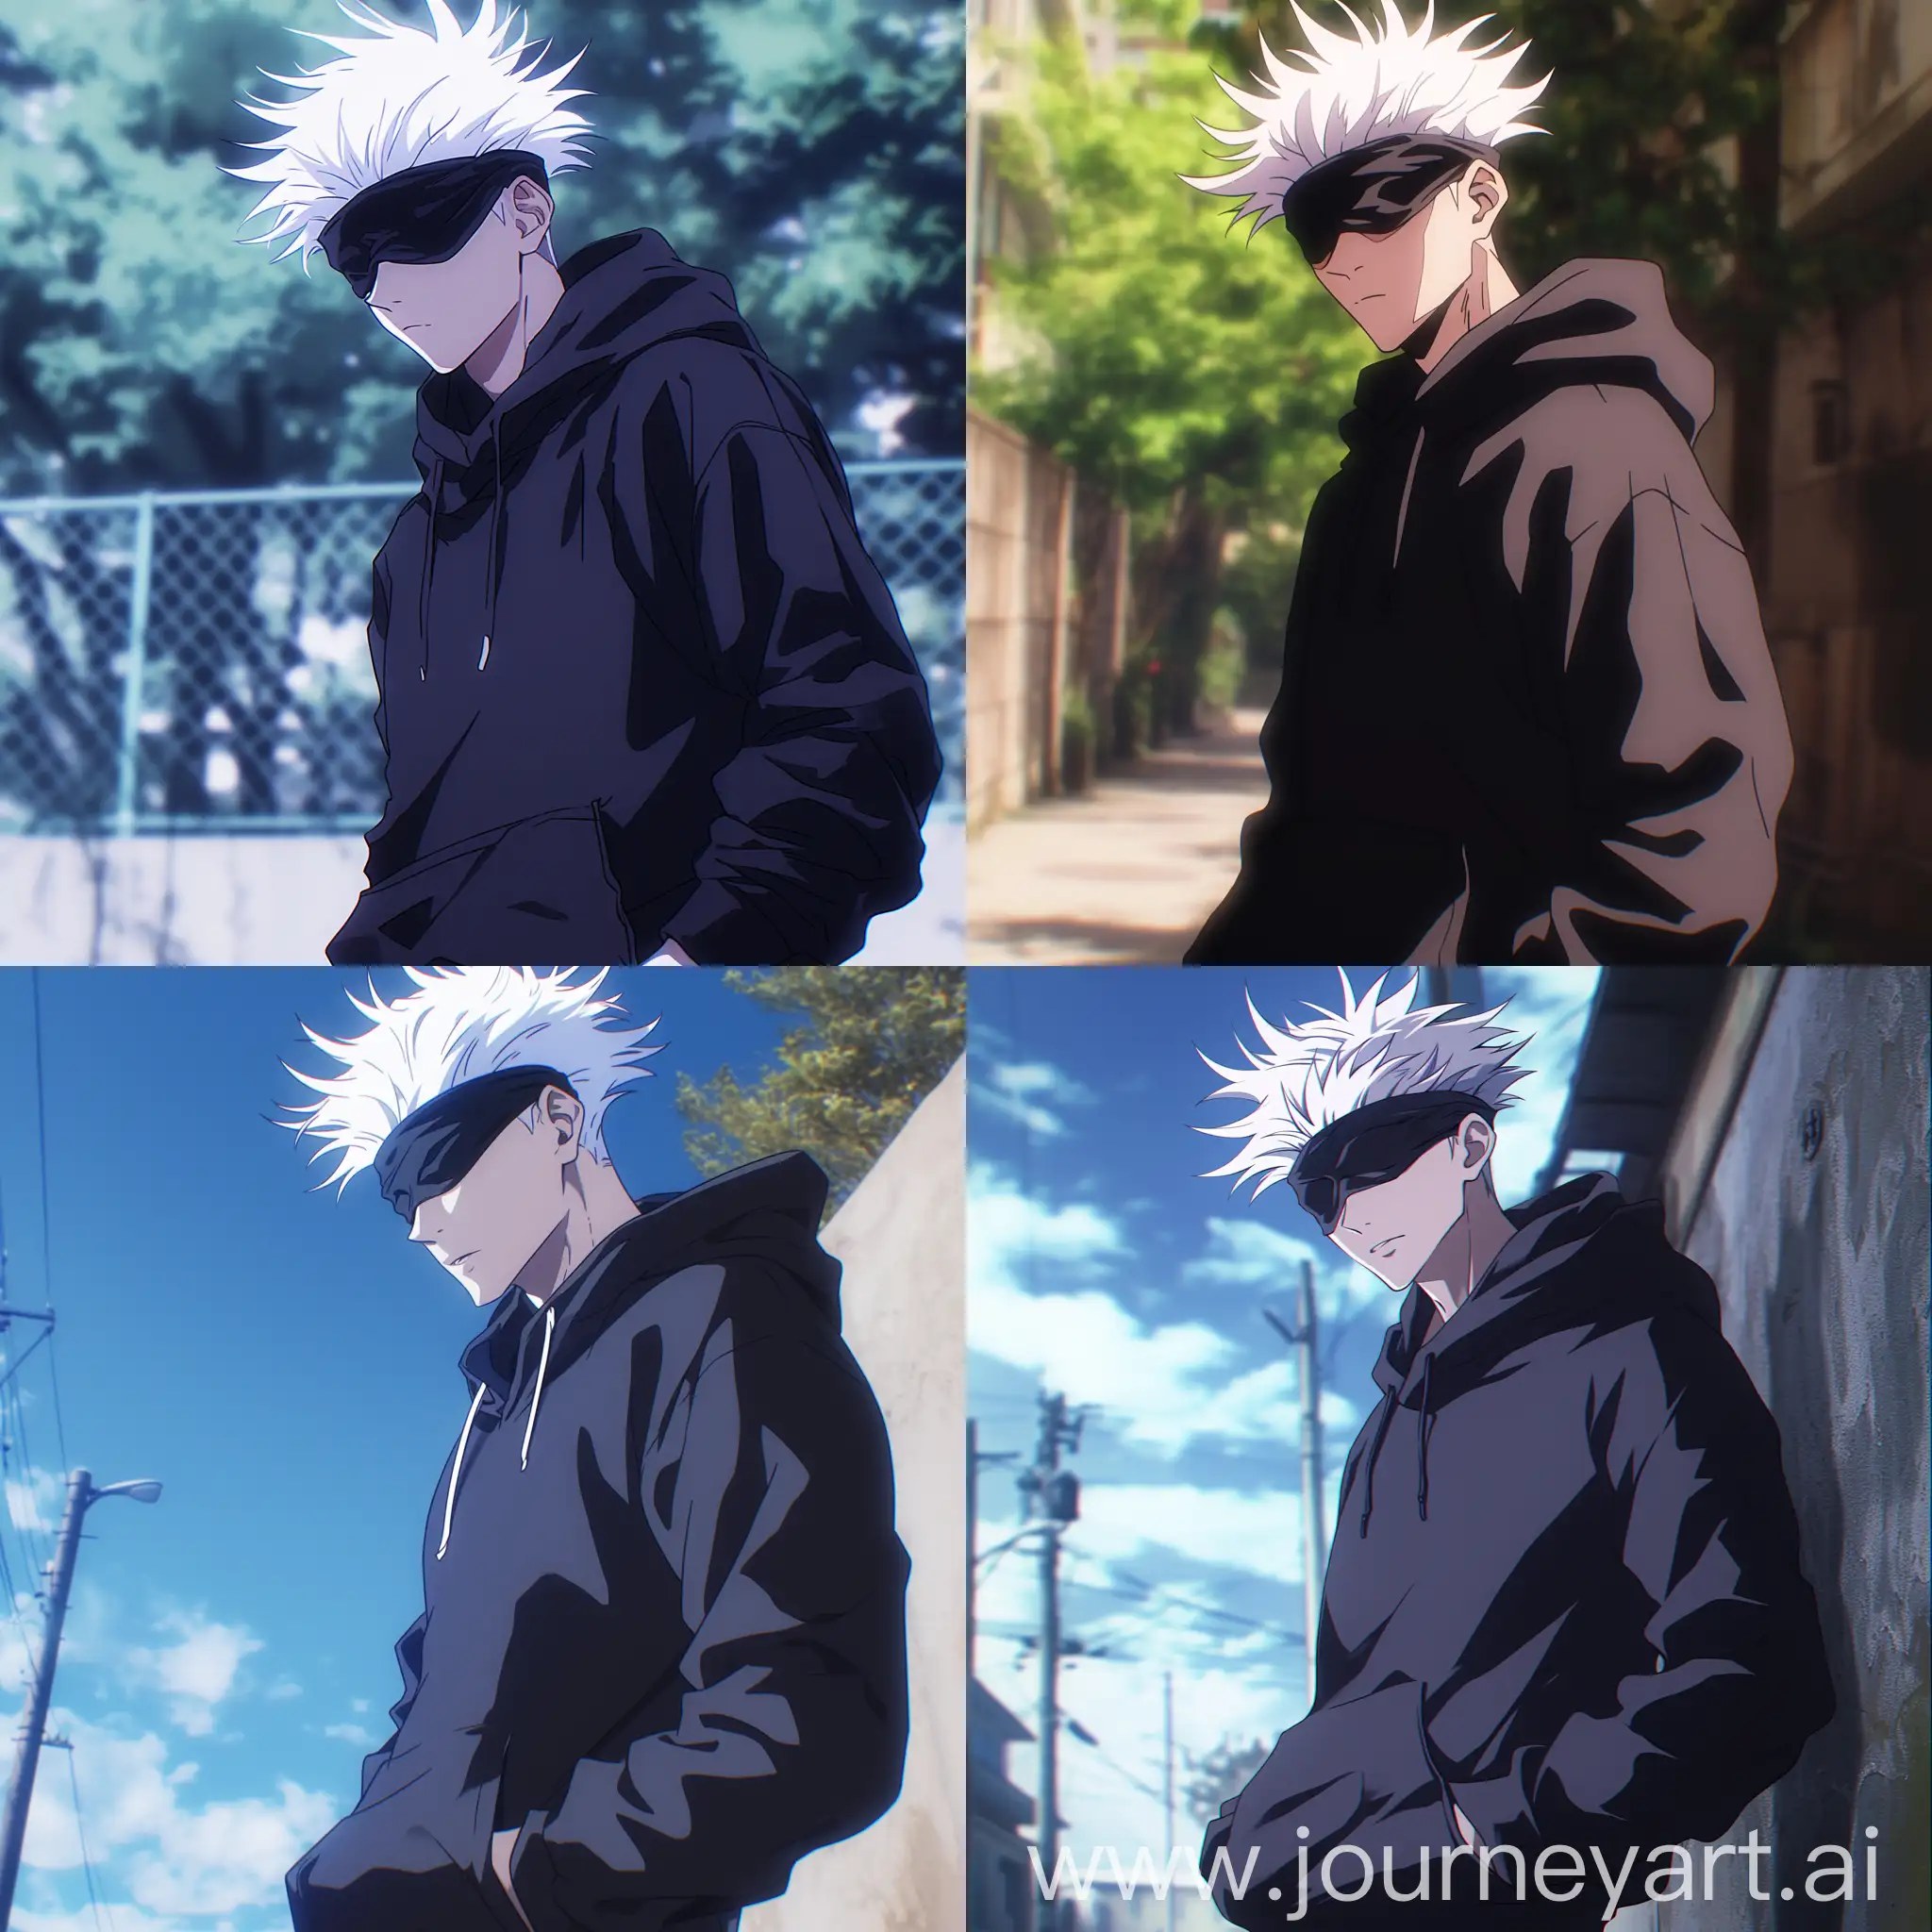 Gojo in cool hoodie, photo screenshot from anime, ((Gojo satoru)), White hair, blind fold, gojo from jujutsu kaisen anime, doubtful face, confused and confident,blank like face, looking at the viewer from side, cool look, wearing black hoodie, hoodie hood on his head, some hairs coming out, hands in pocket, half body shot, outdoors --niji 6